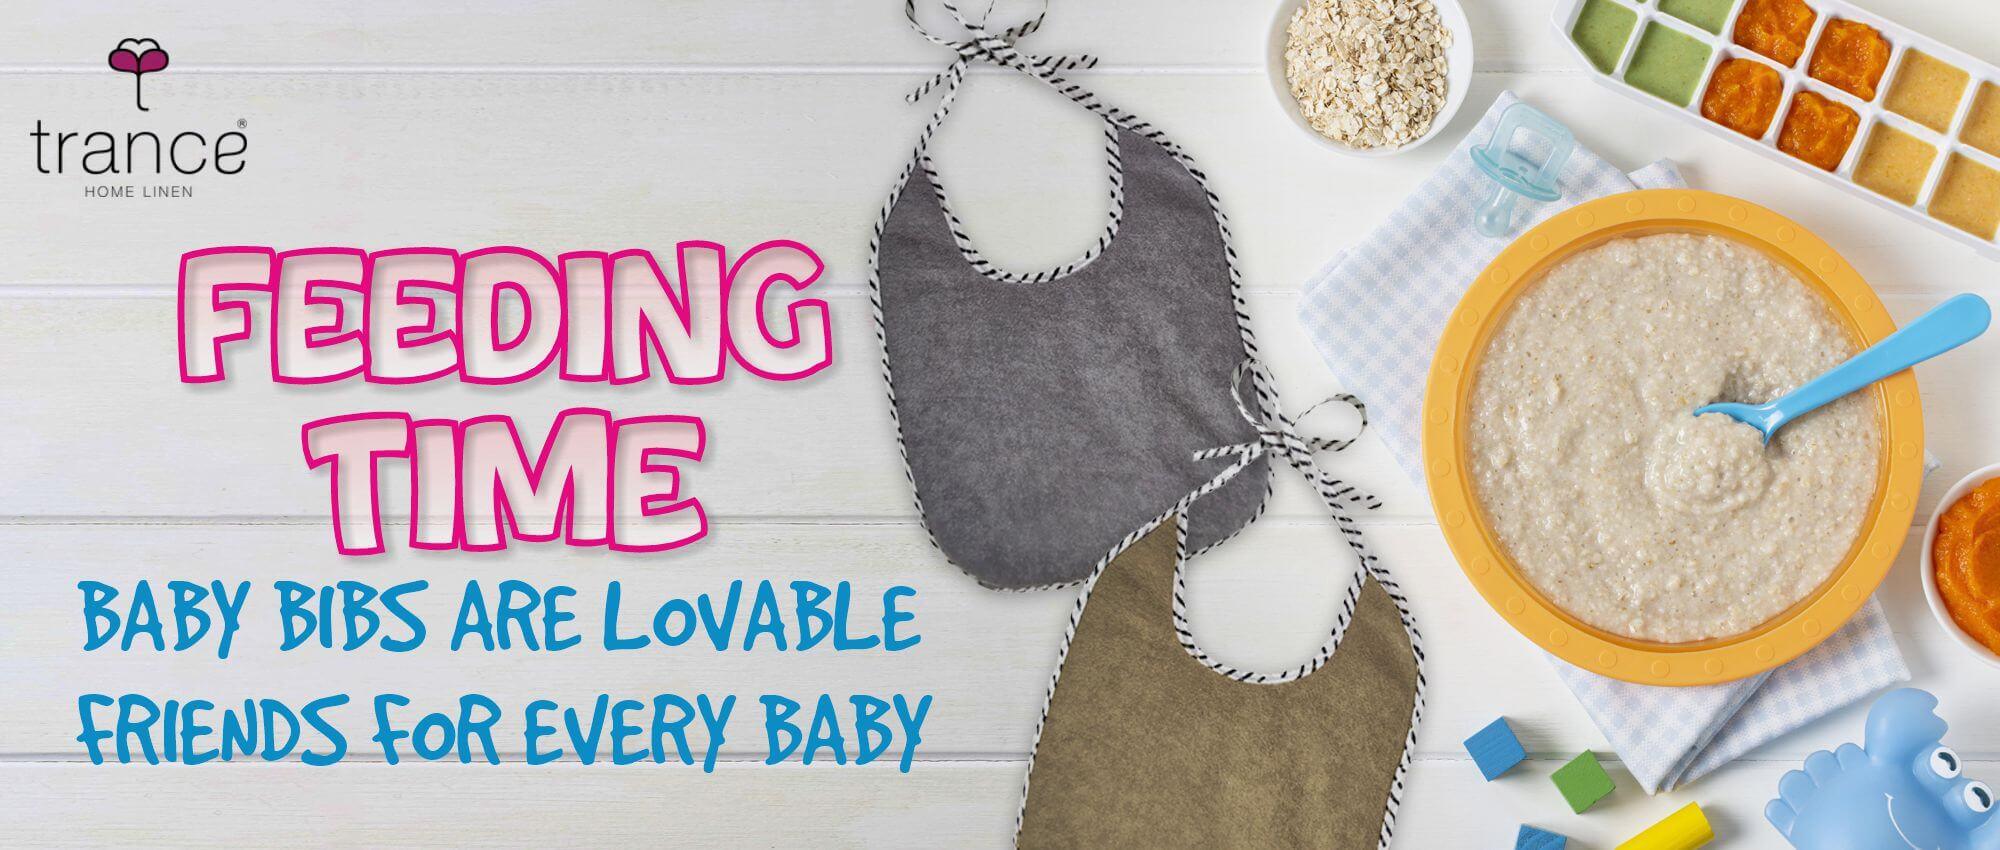 Feeding Time - Baby Bibs Are Lovable Friends For Every Baby